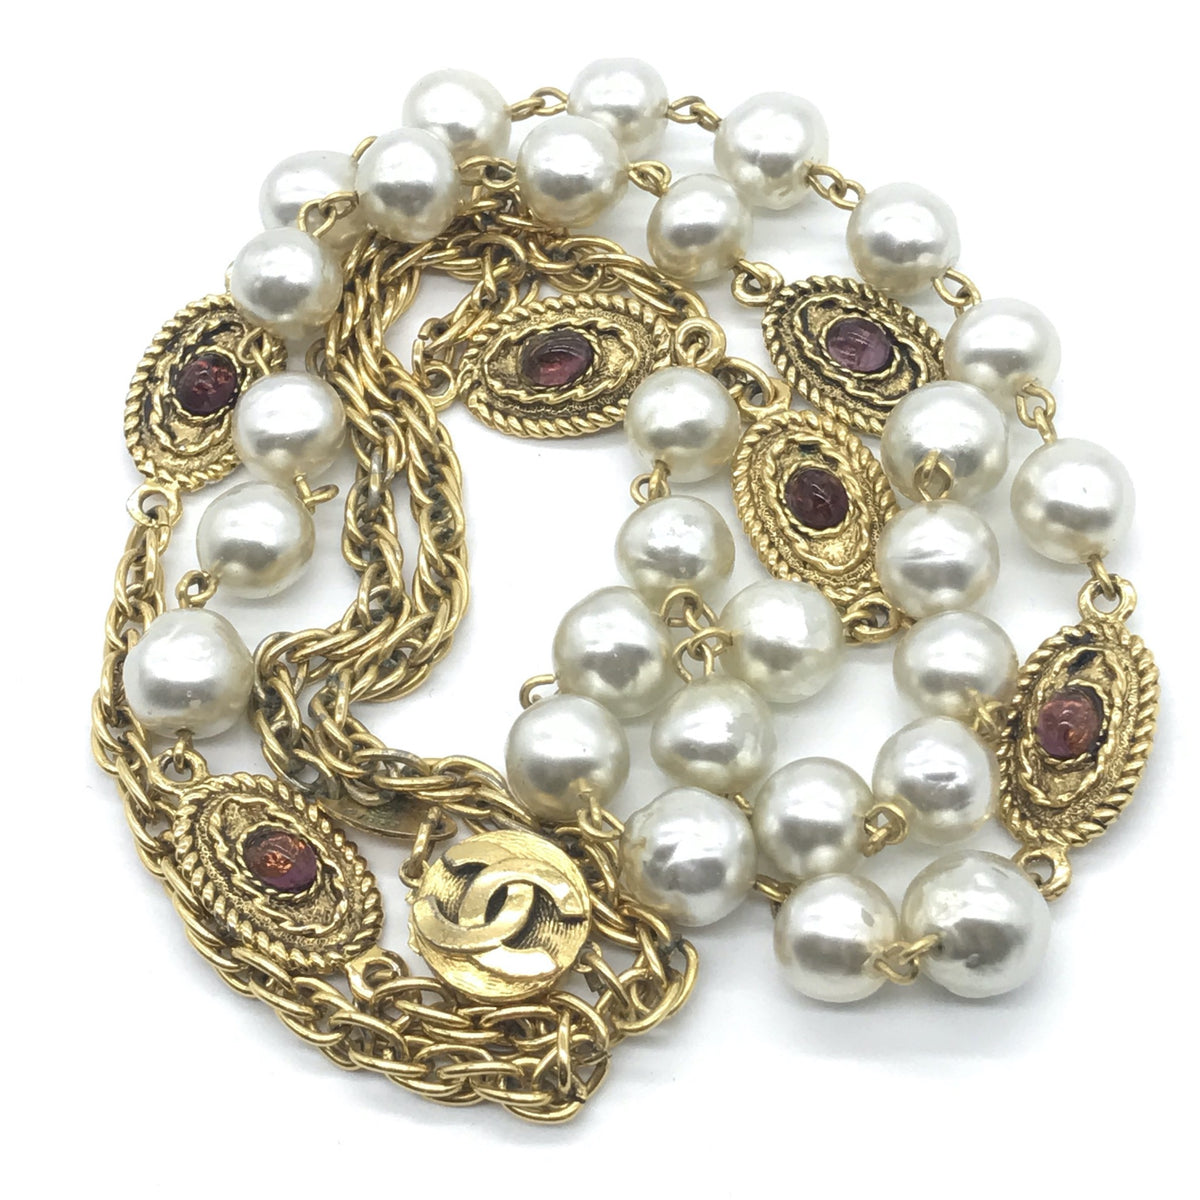 Get the best deals on vintage chanel pearls when you shop the